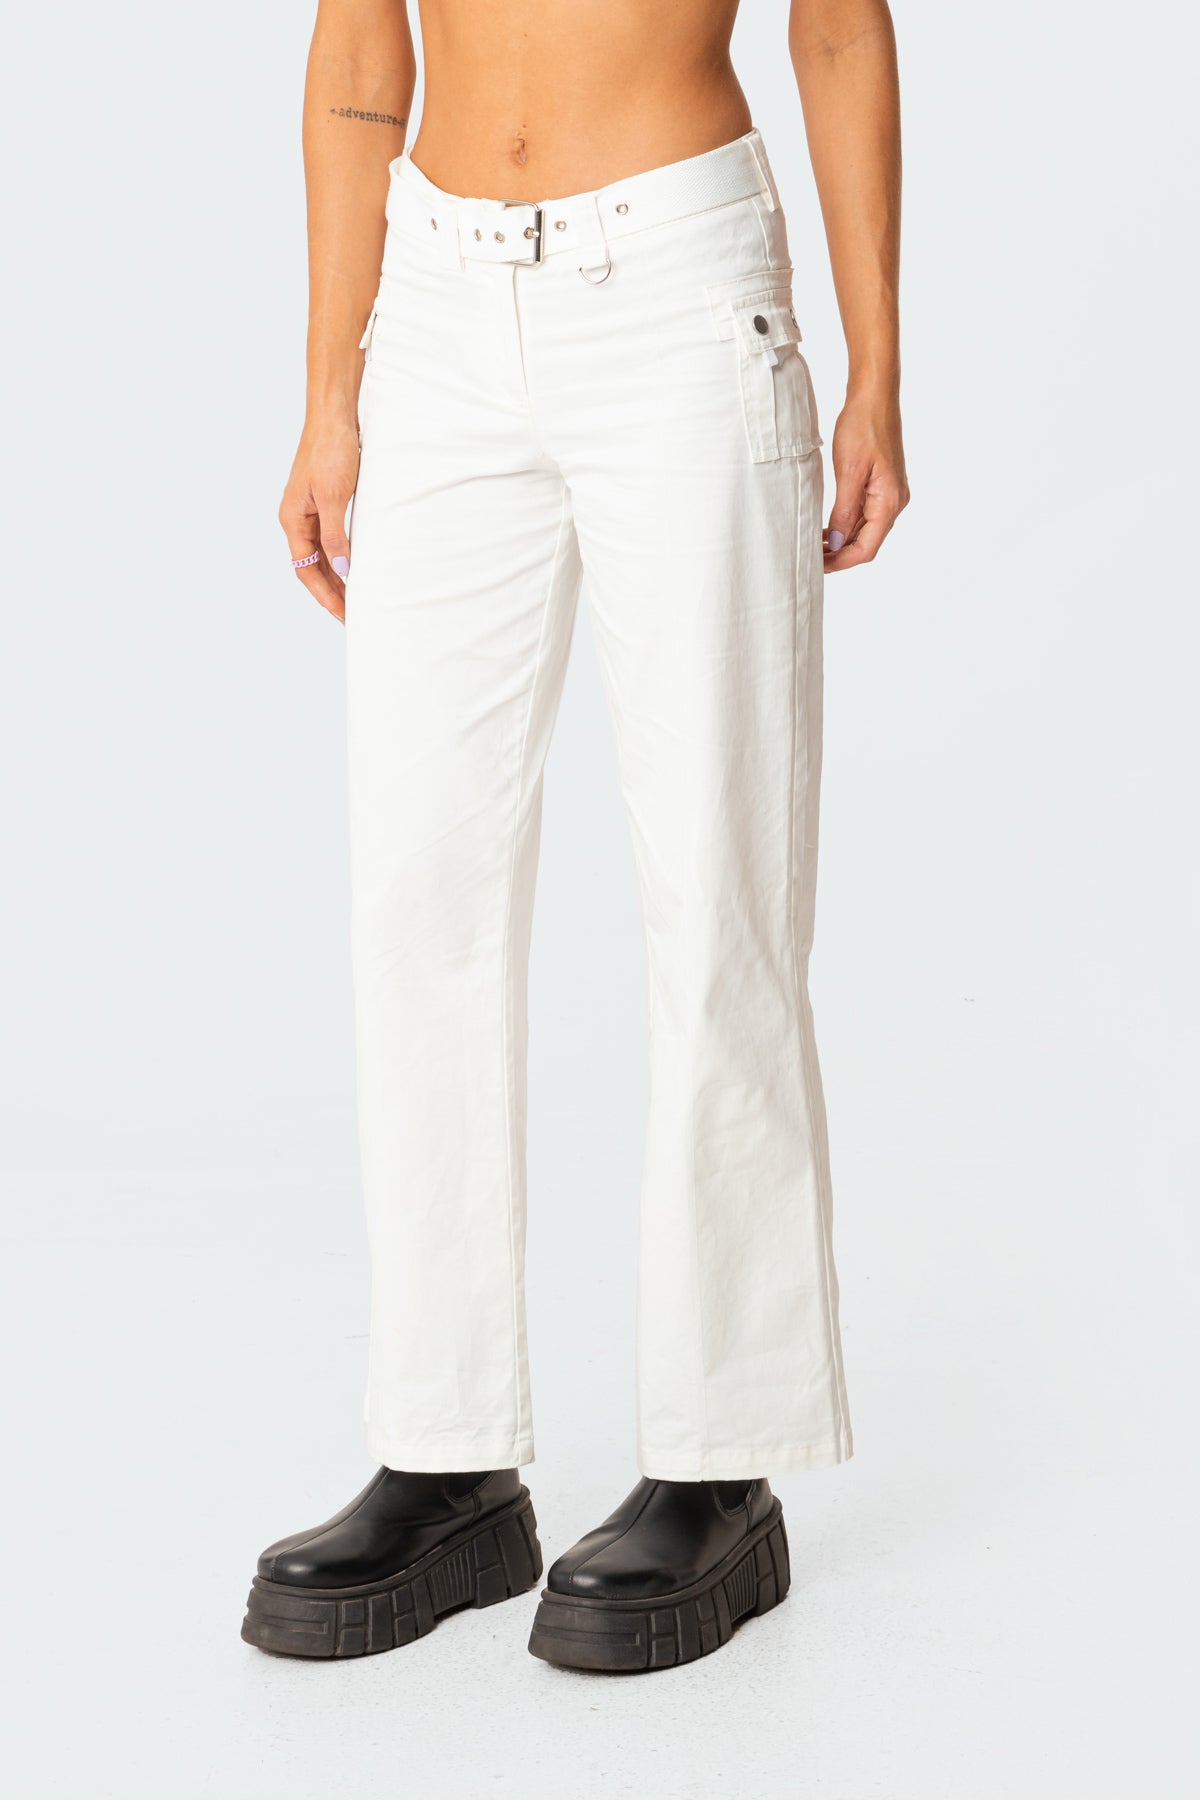 EDIKTED Lyric Cotton Cover-Up Cargo Pants in White